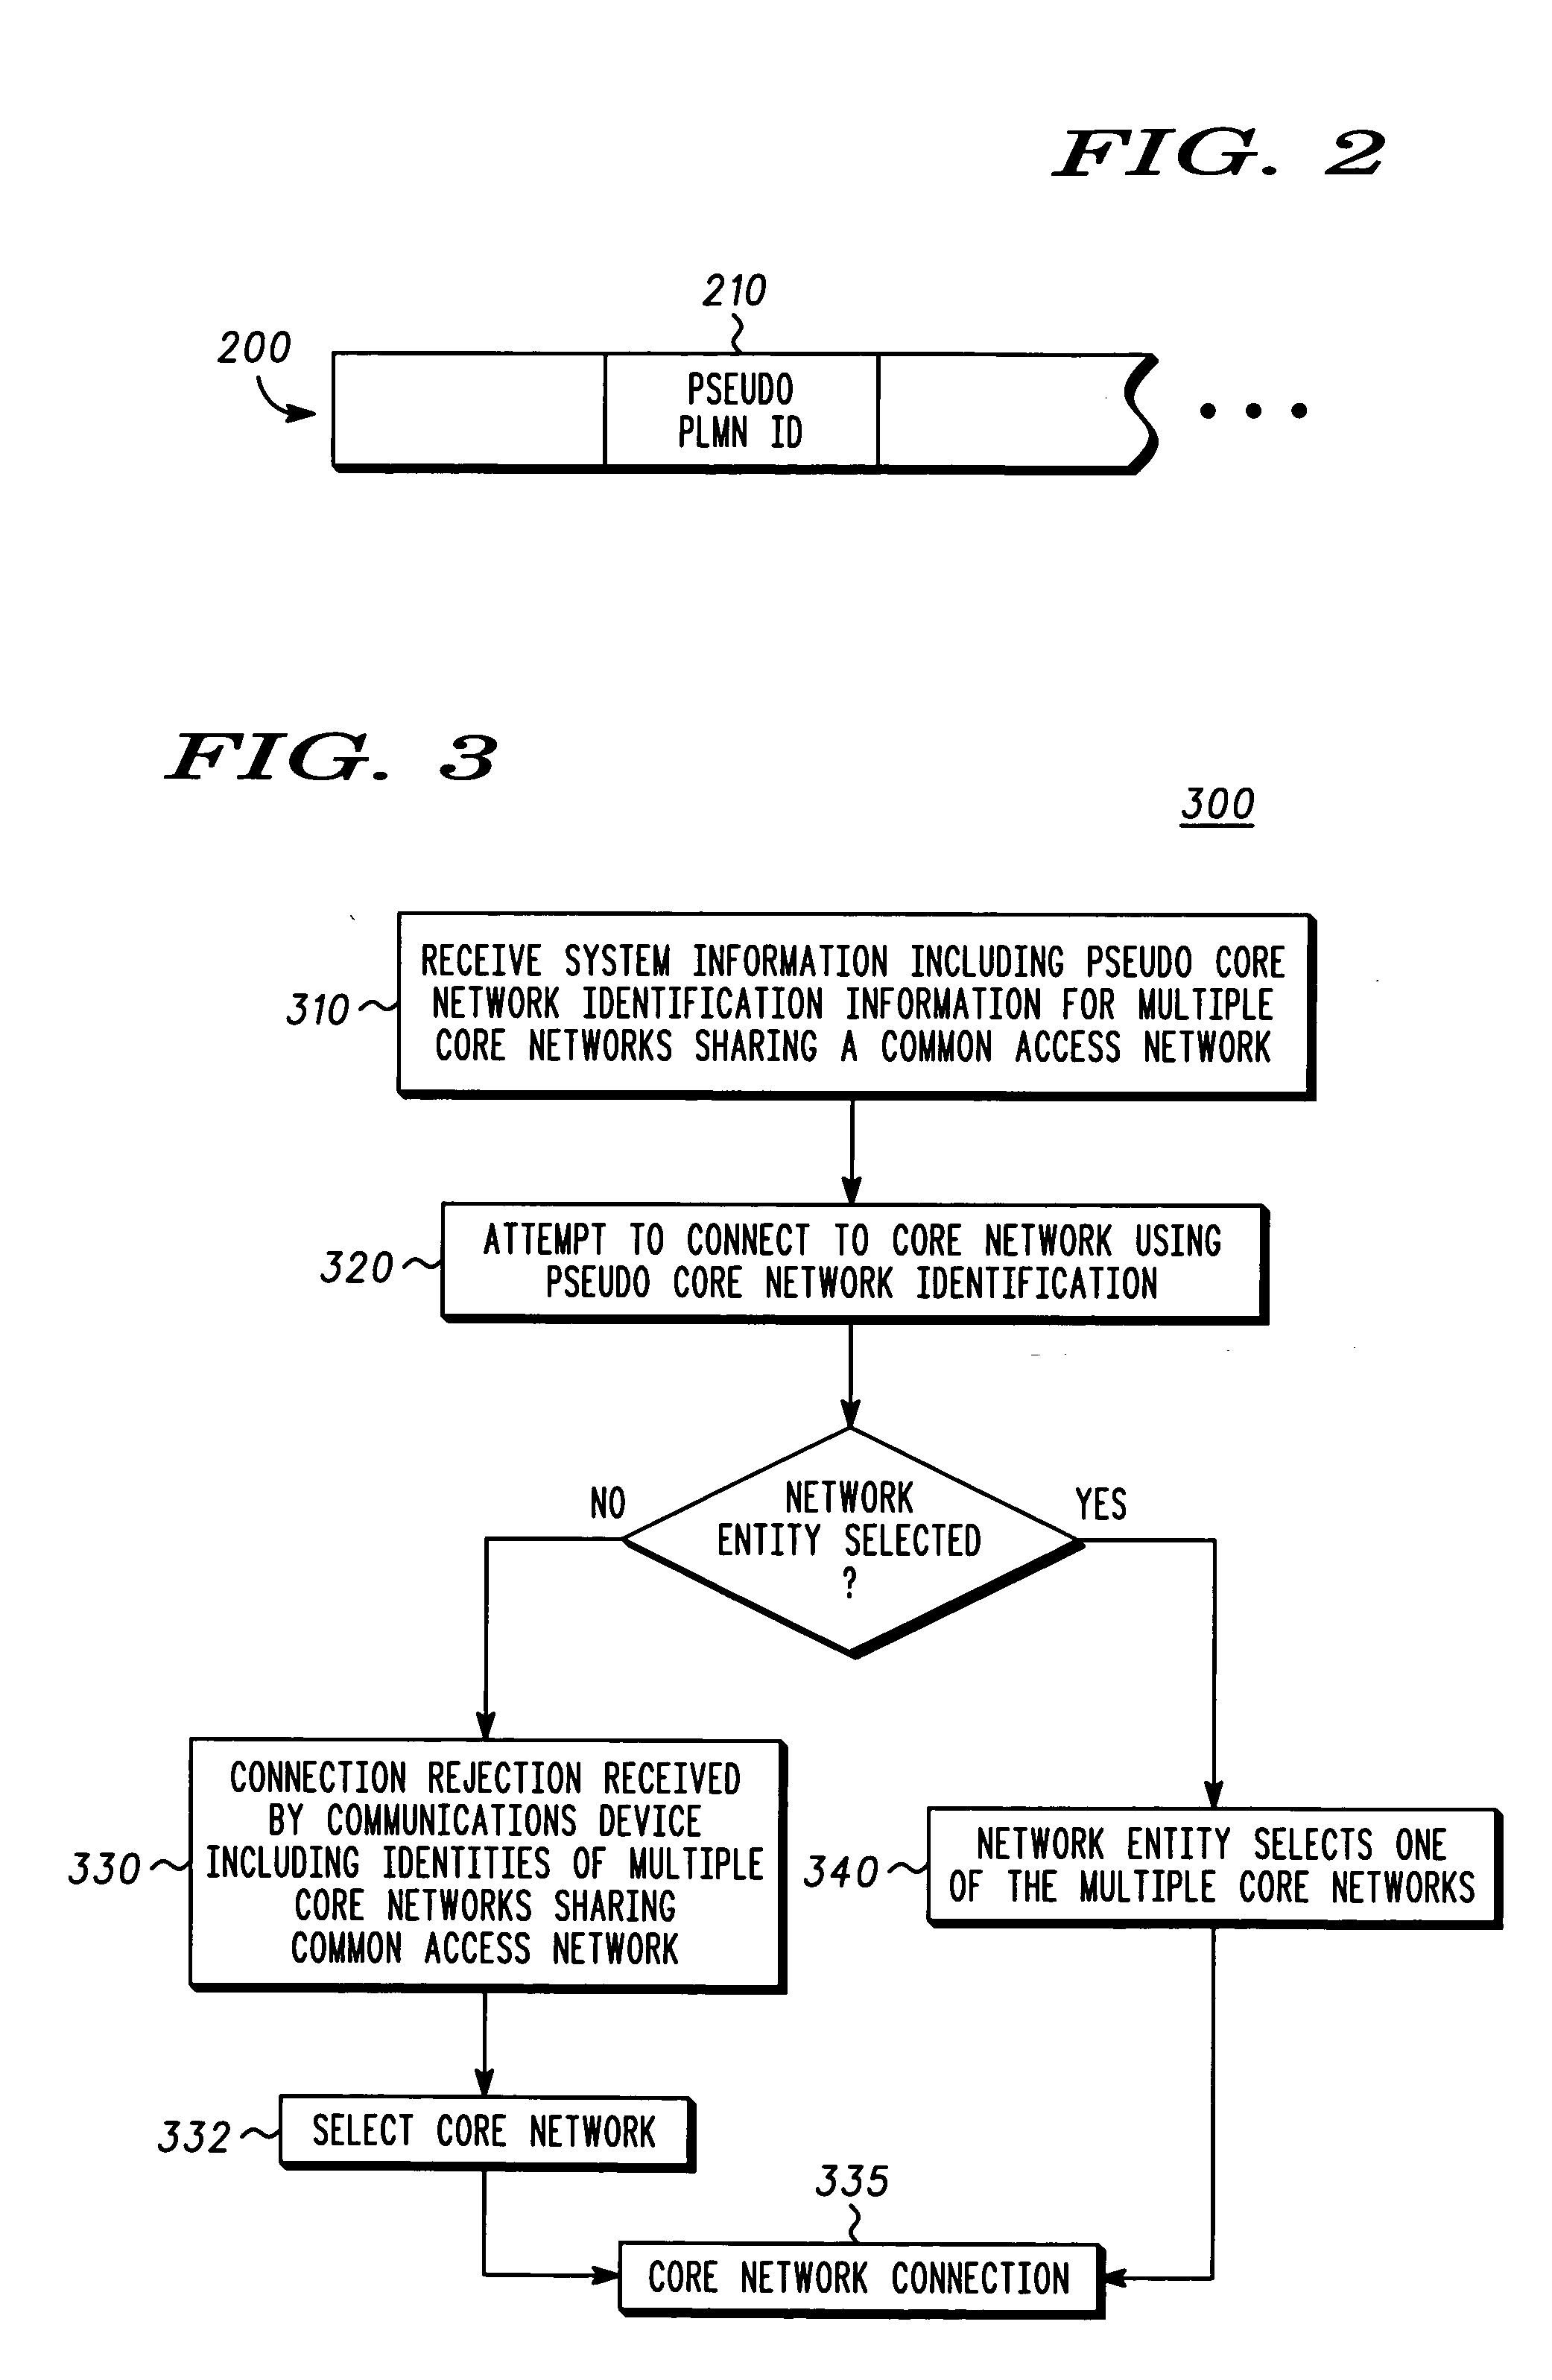 Wireless access network sharing among core networks and methods